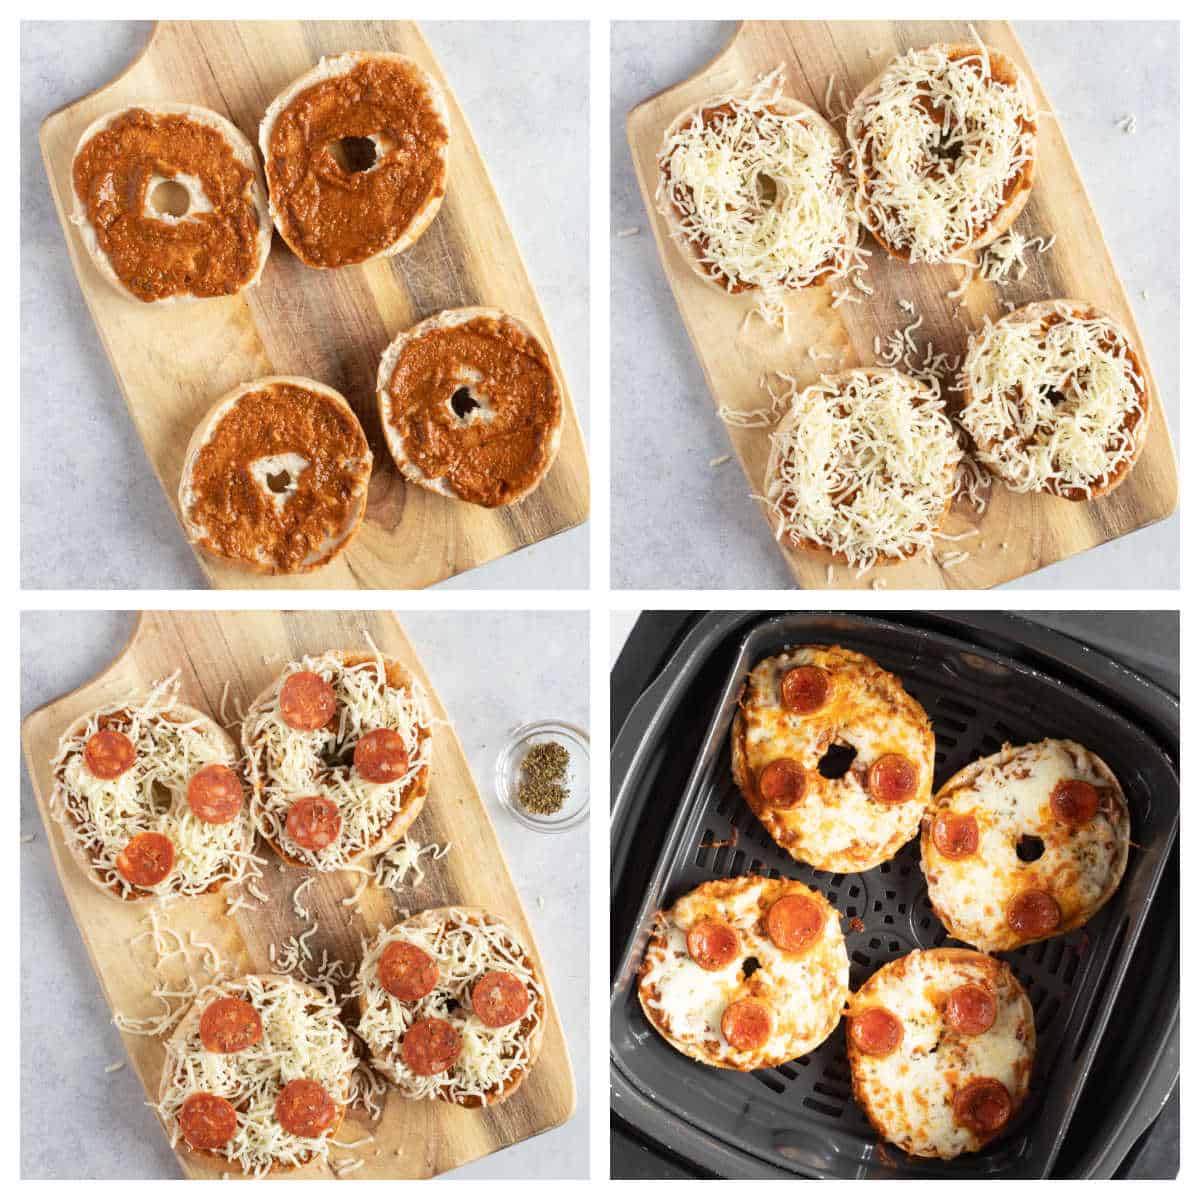 Assembling pizza bagels on a wooden board.